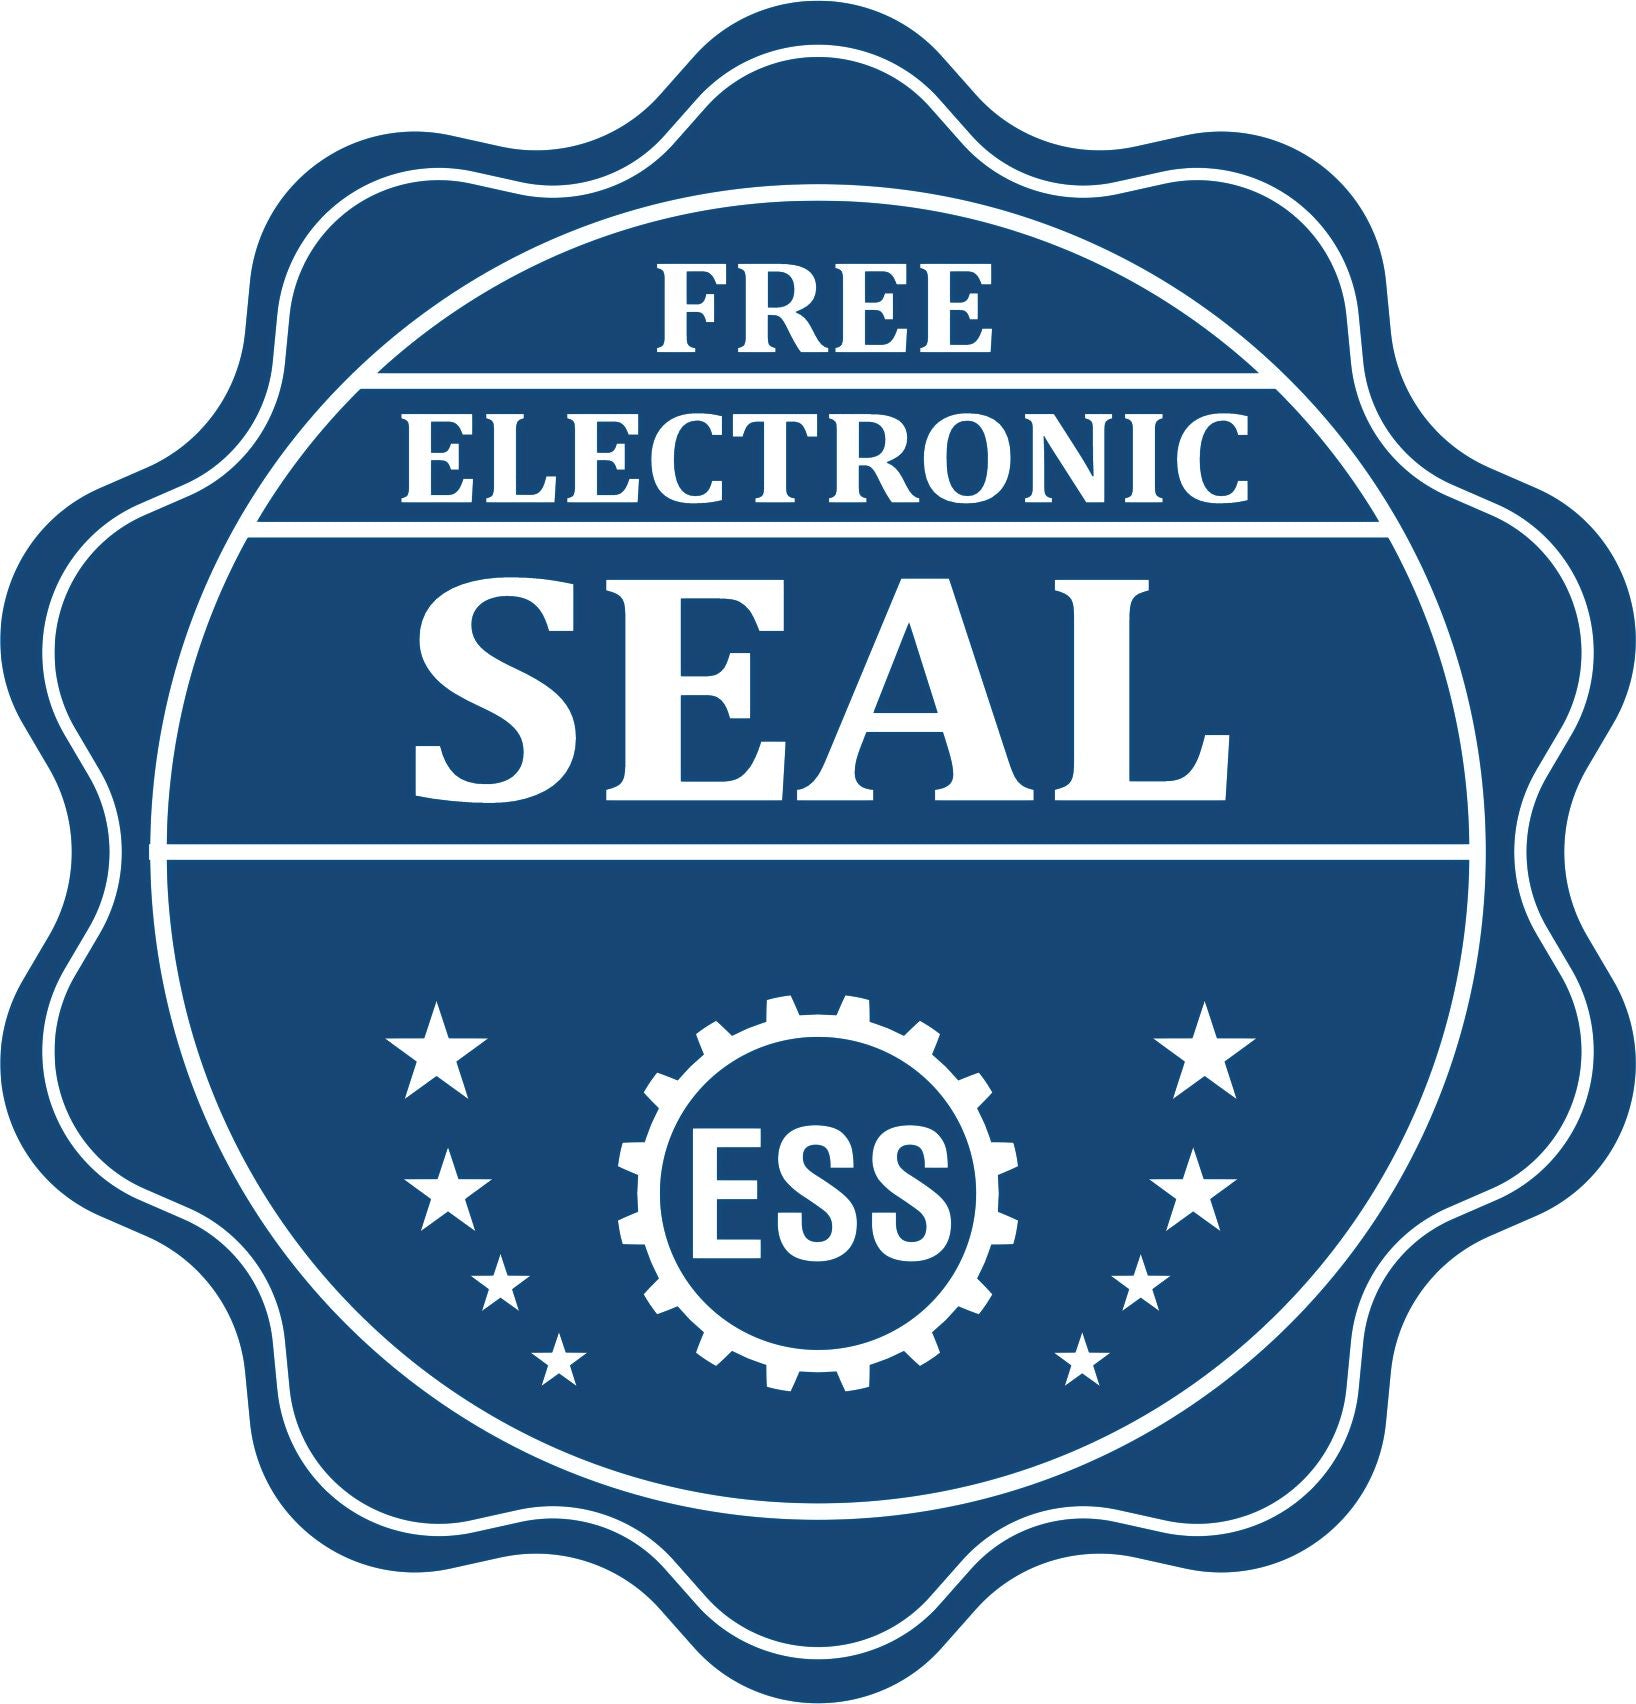 A badge showing a free electronic seal for the Heavy-Duty Virginia Rectangular Notary Stamp with stars and the ESS gear on the emblem.